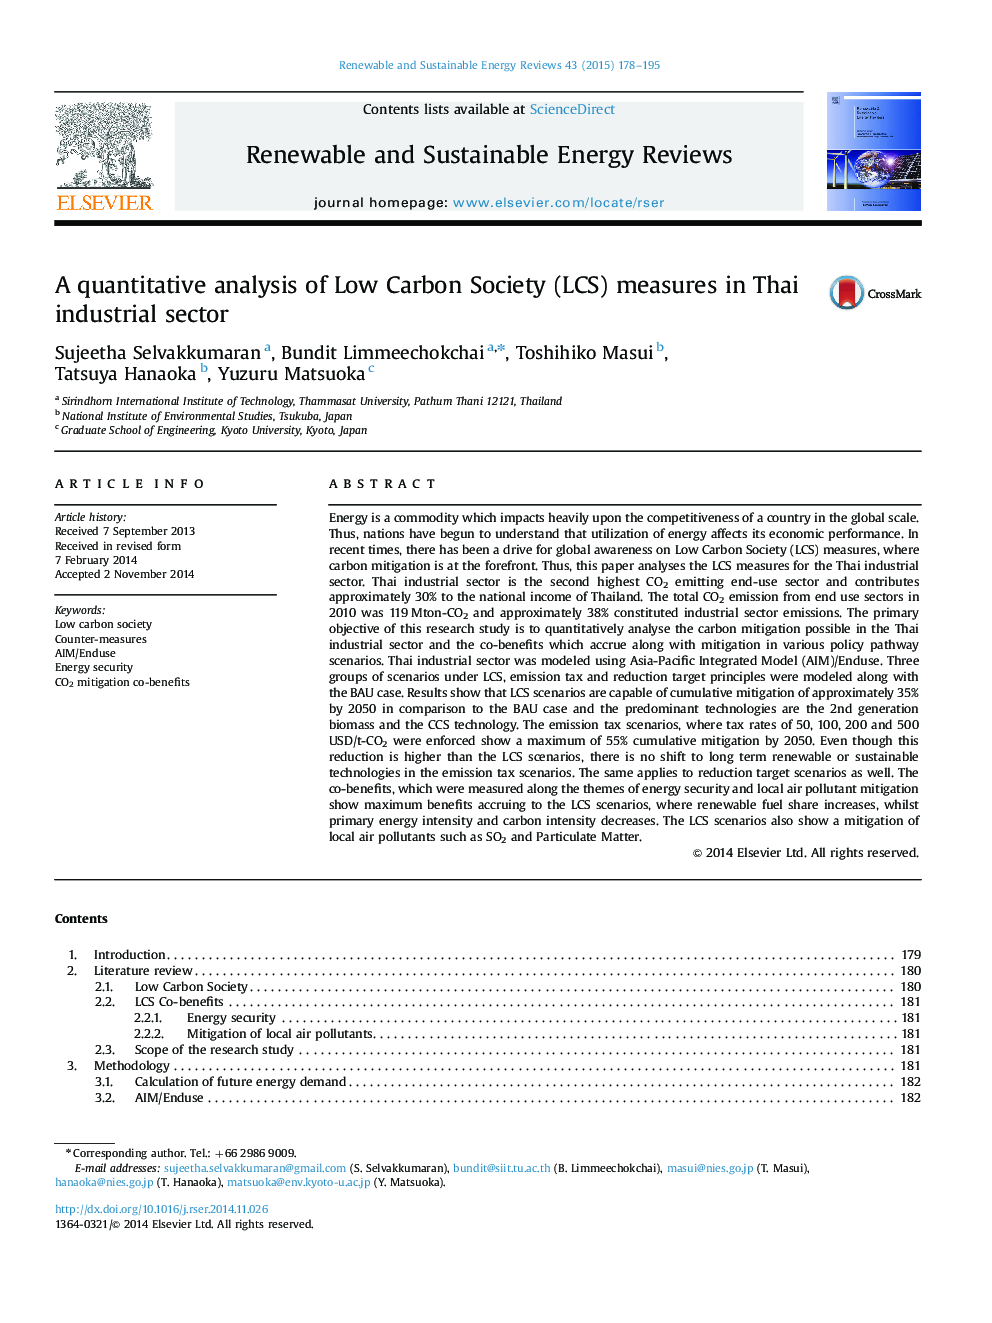 A quantitative analysis of Low Carbon Society (LCS) measures in Thai industrial sector